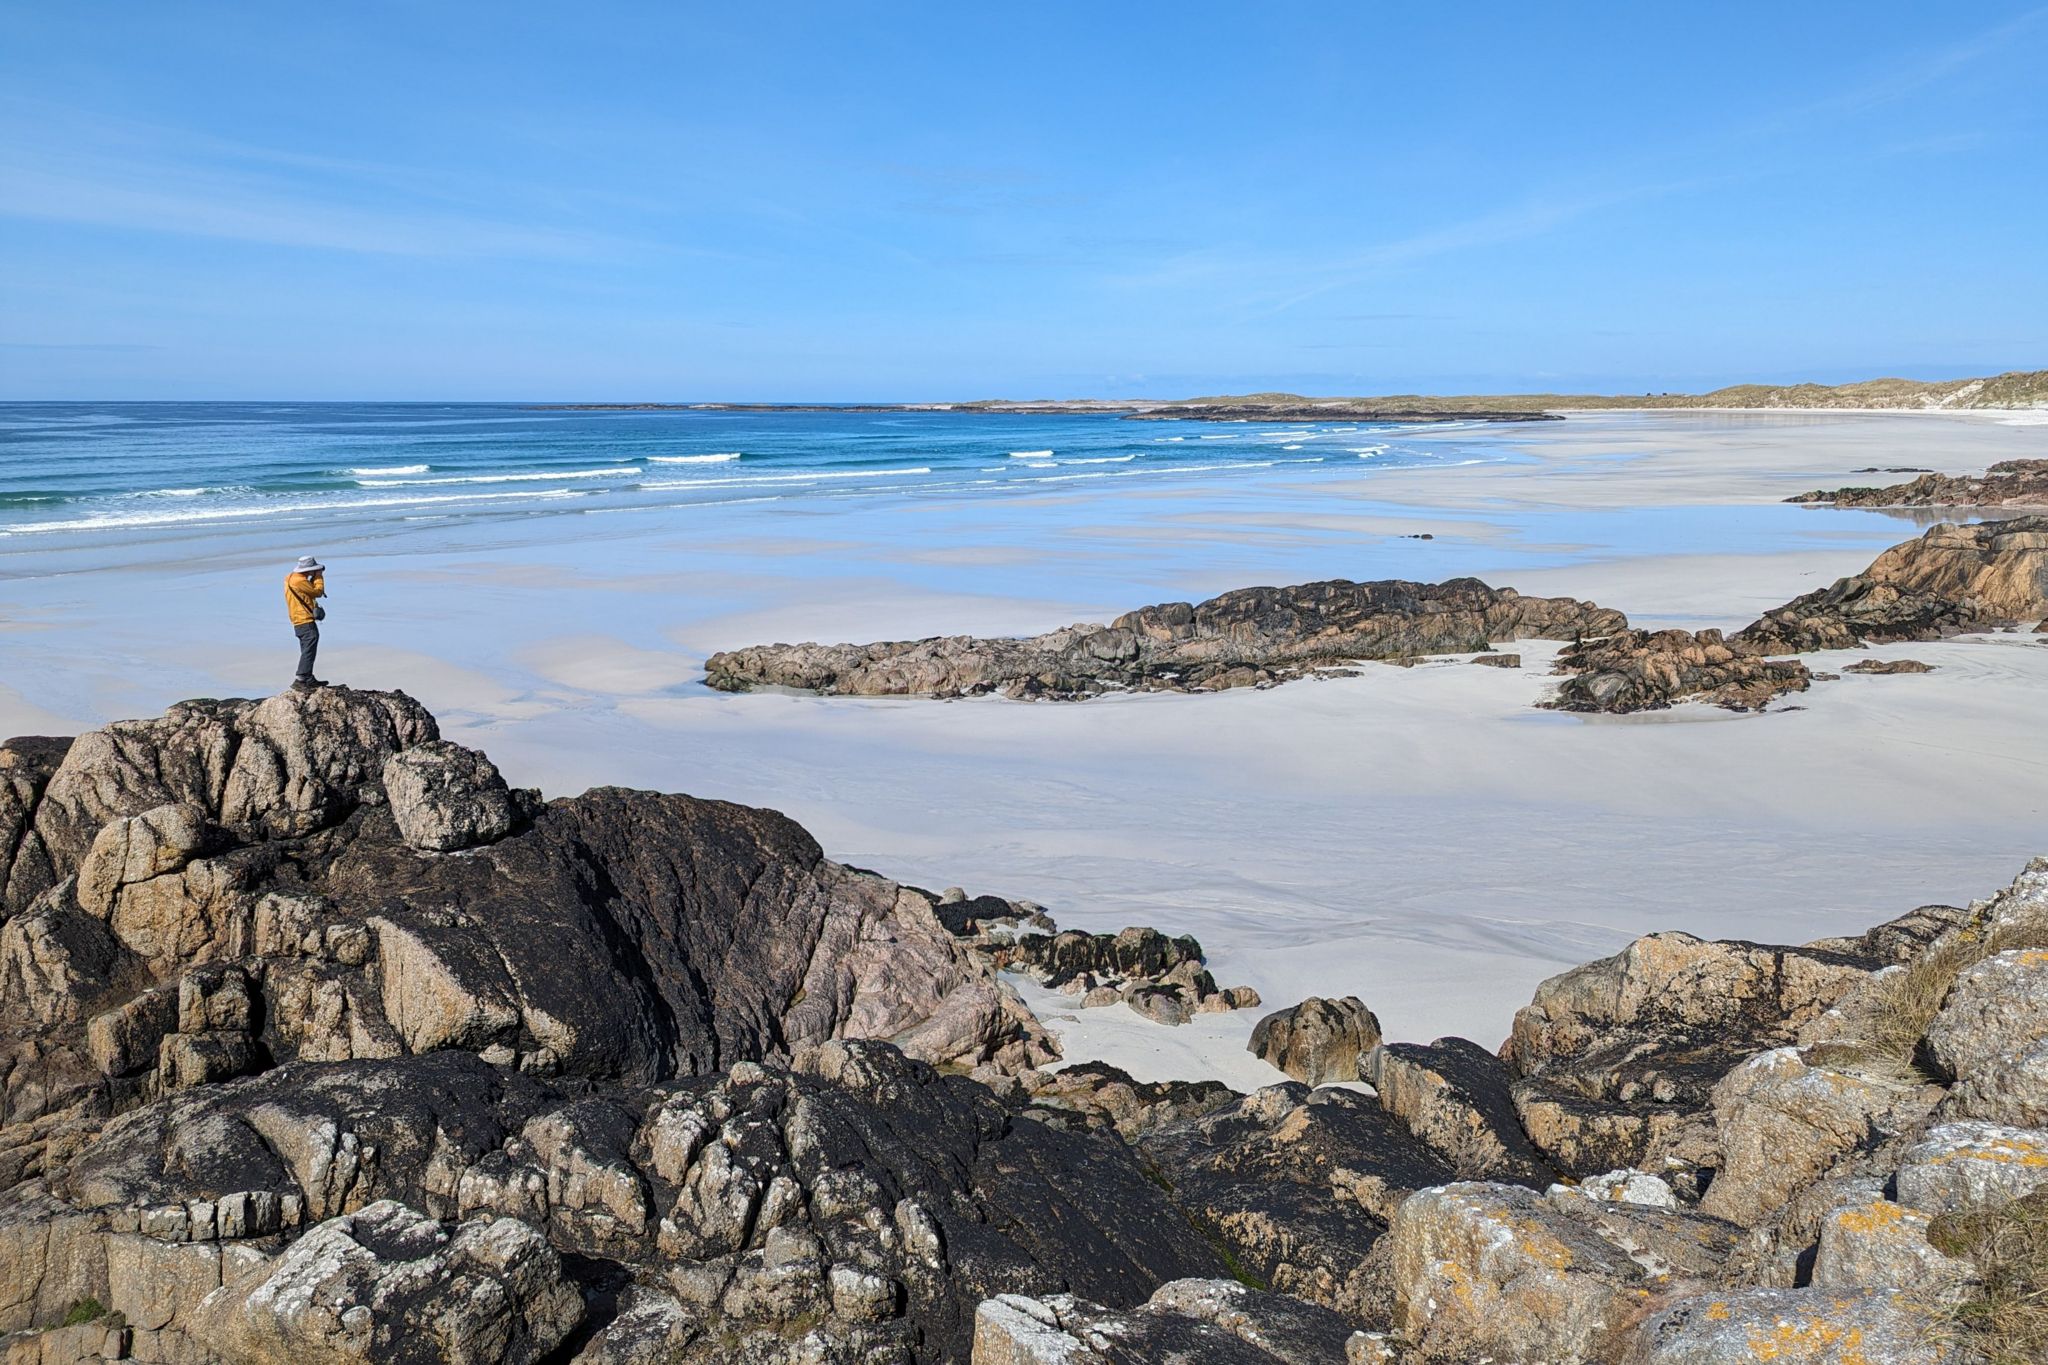 Helen opted for the Maze beach on Tiree as her favourite walk